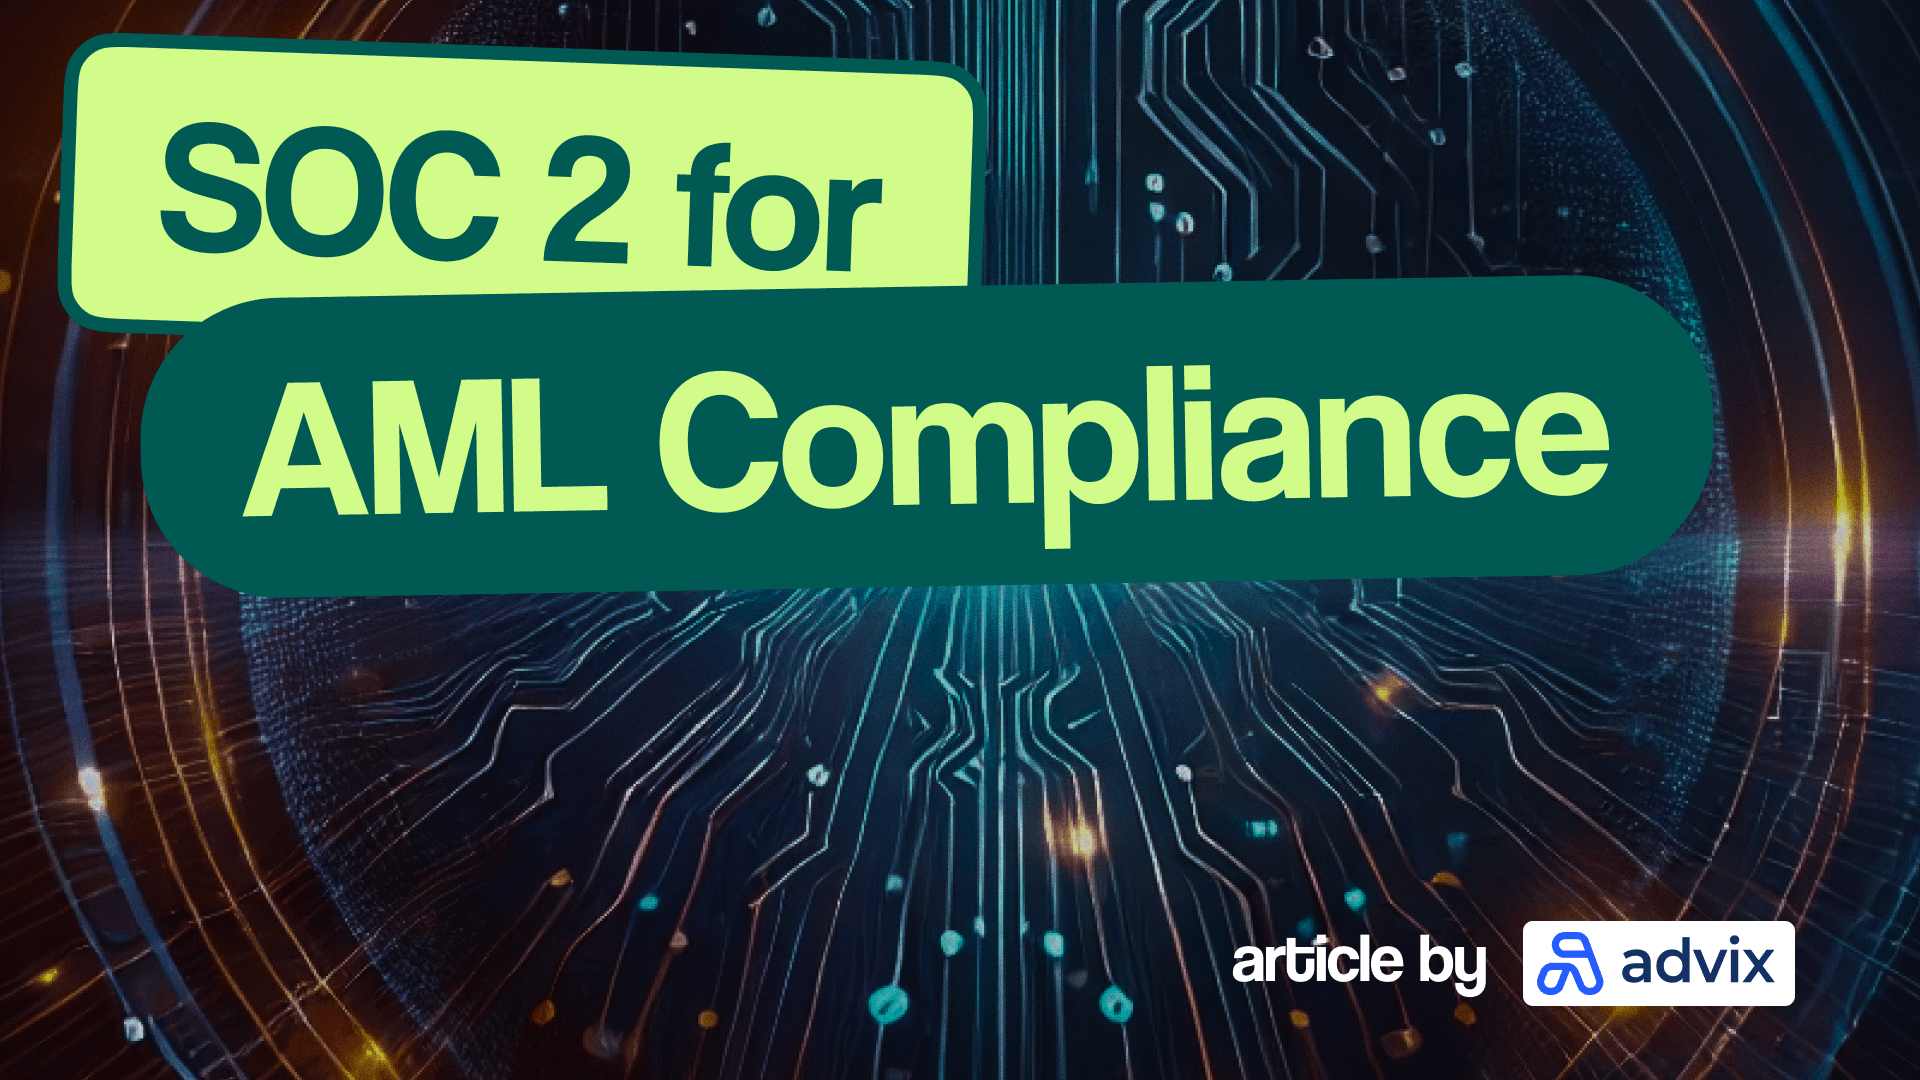 SOC 2 for AML Compliance